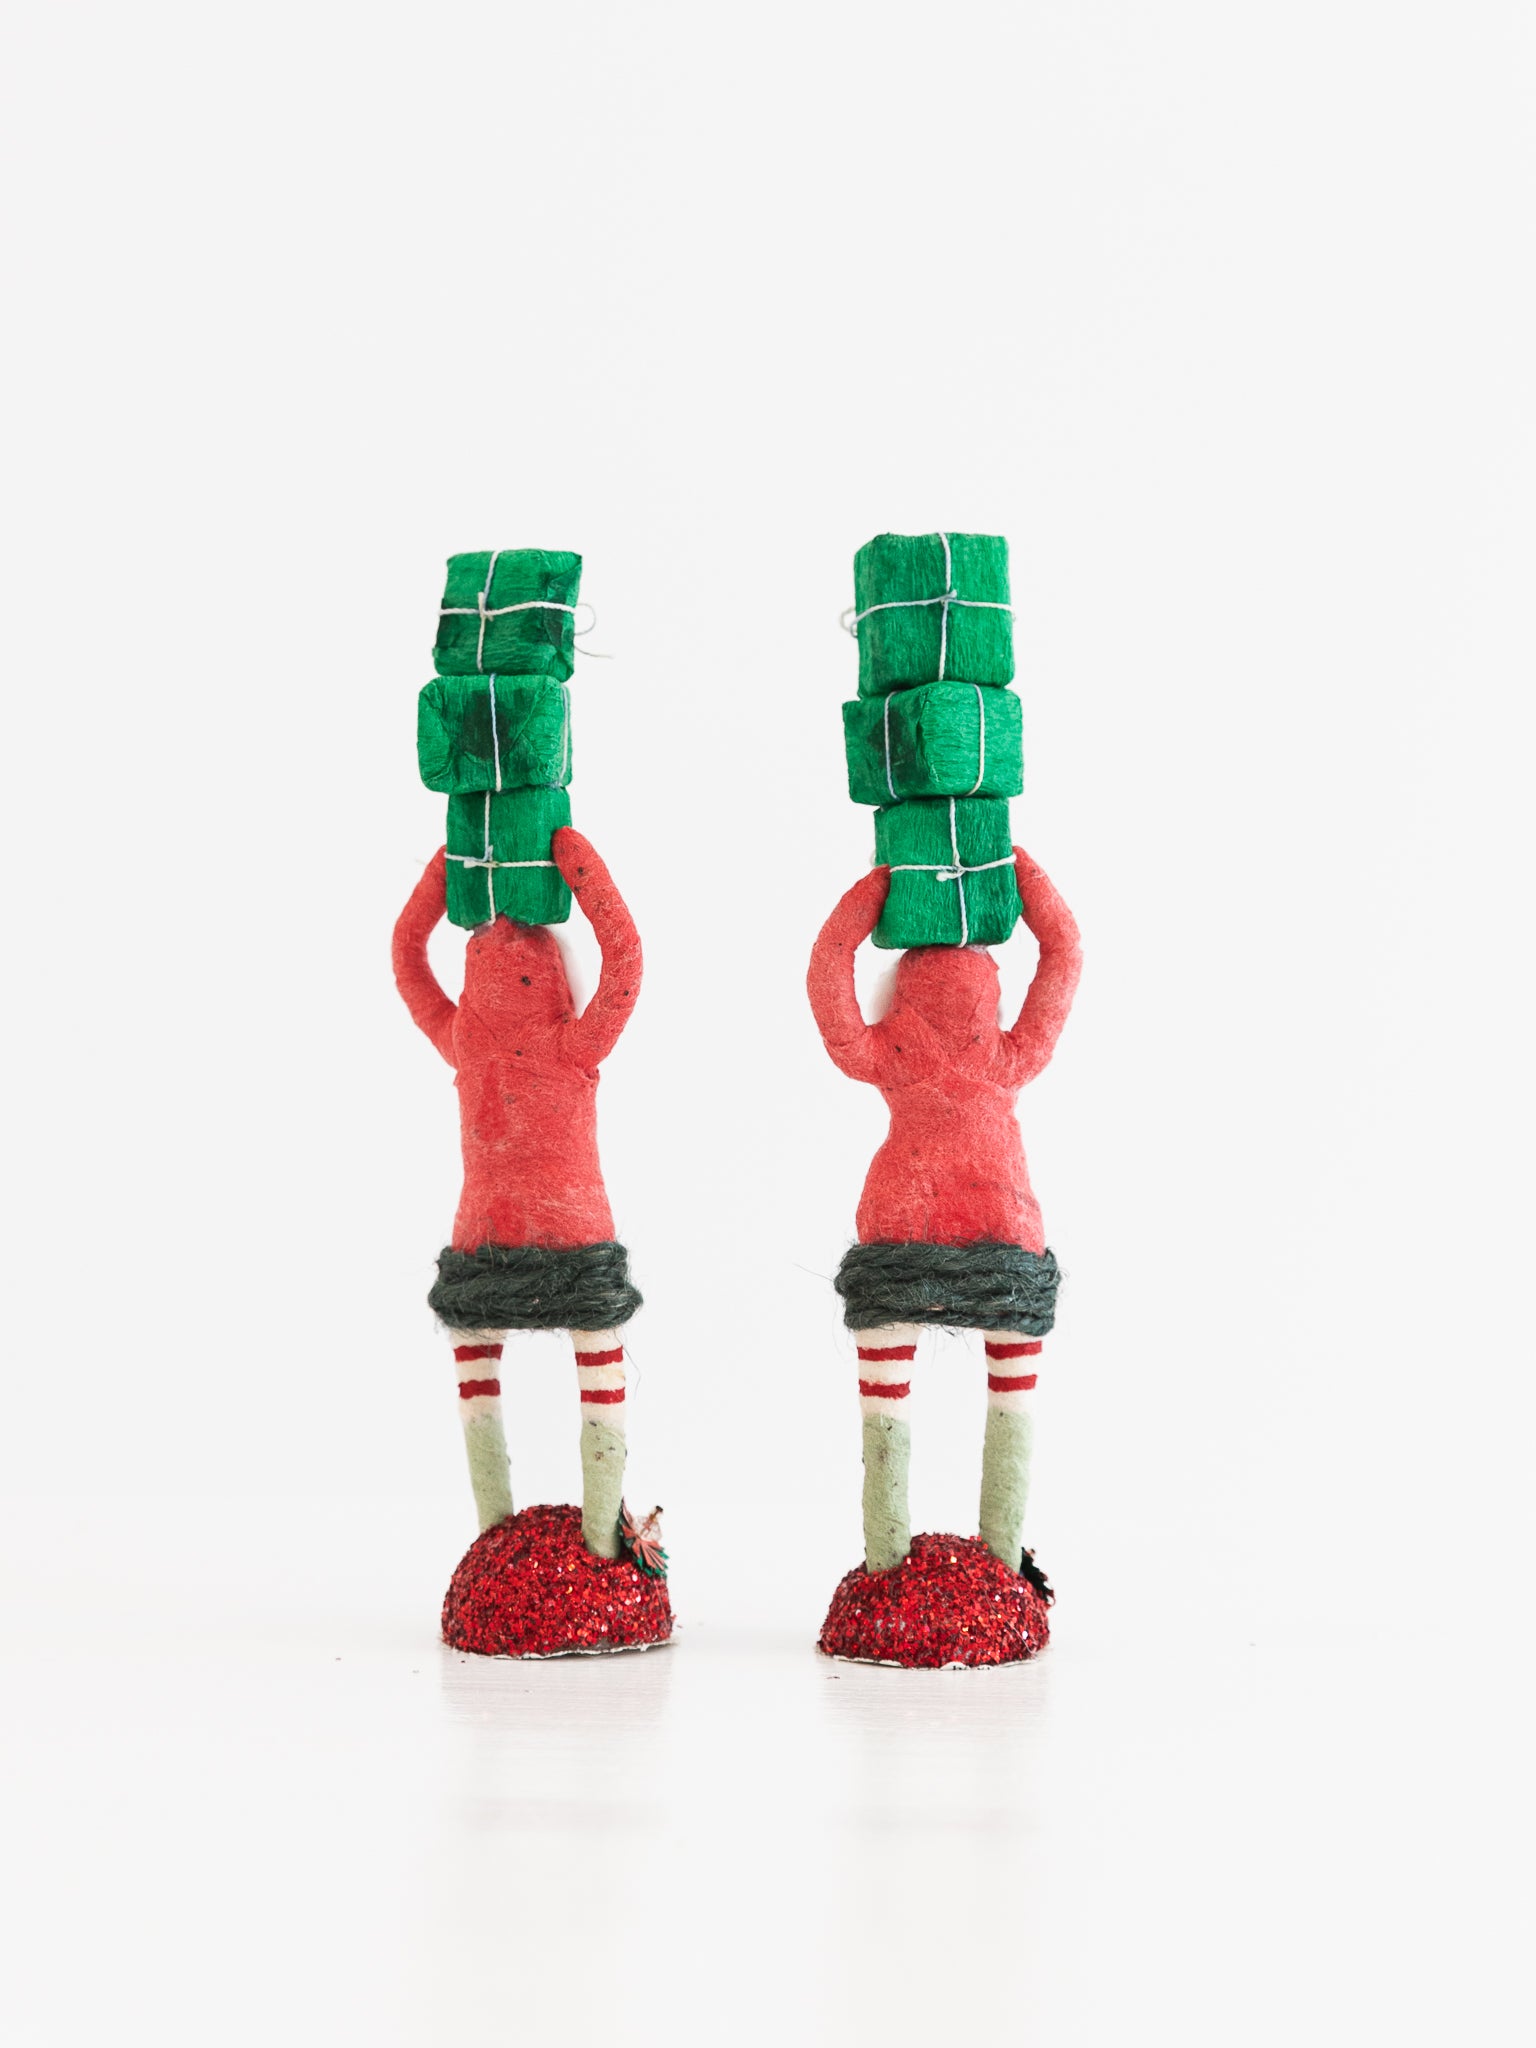 Spun Cotton Present Stack Figure with Green Presents - Worthwhile